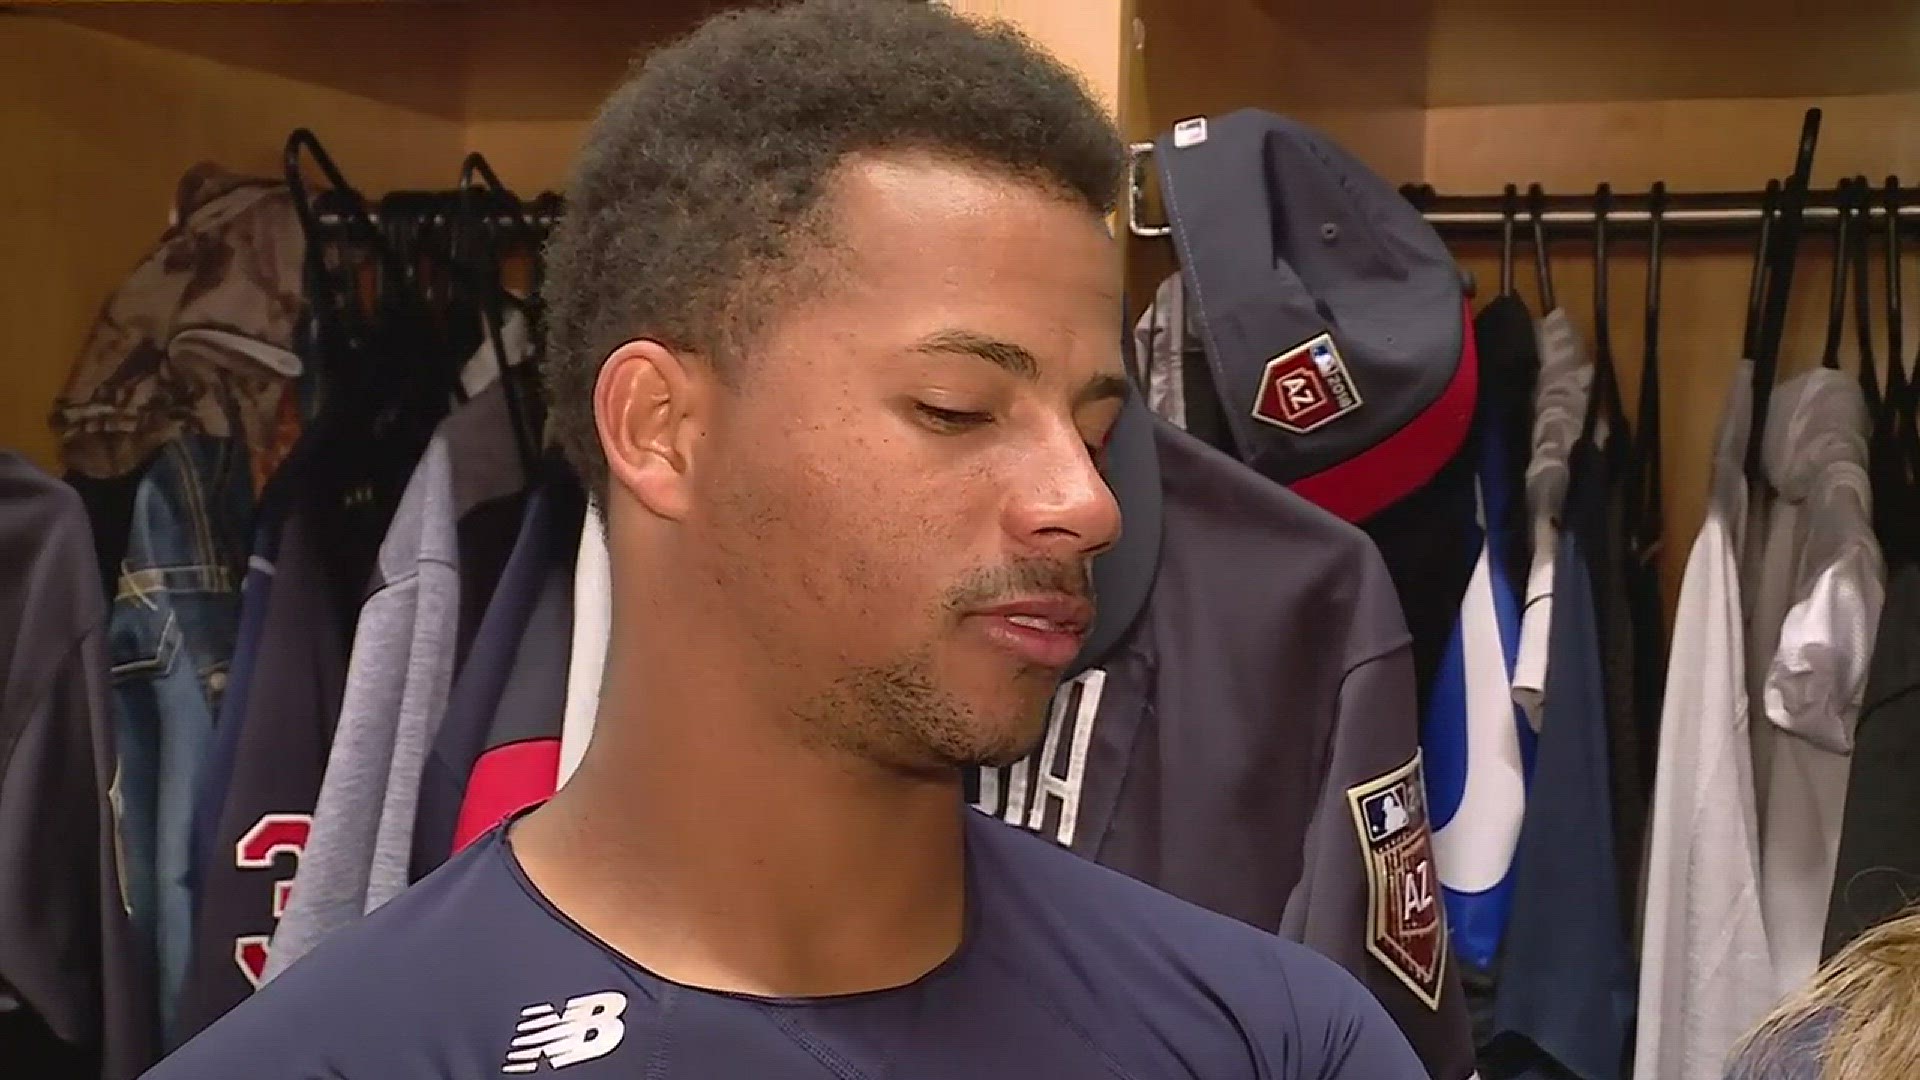 Cleveland Indians top prospect Francisco Mejia discusses what position he'll play in the big leagues, his expectations for the coming year and why he keeps changing jersey numbers.